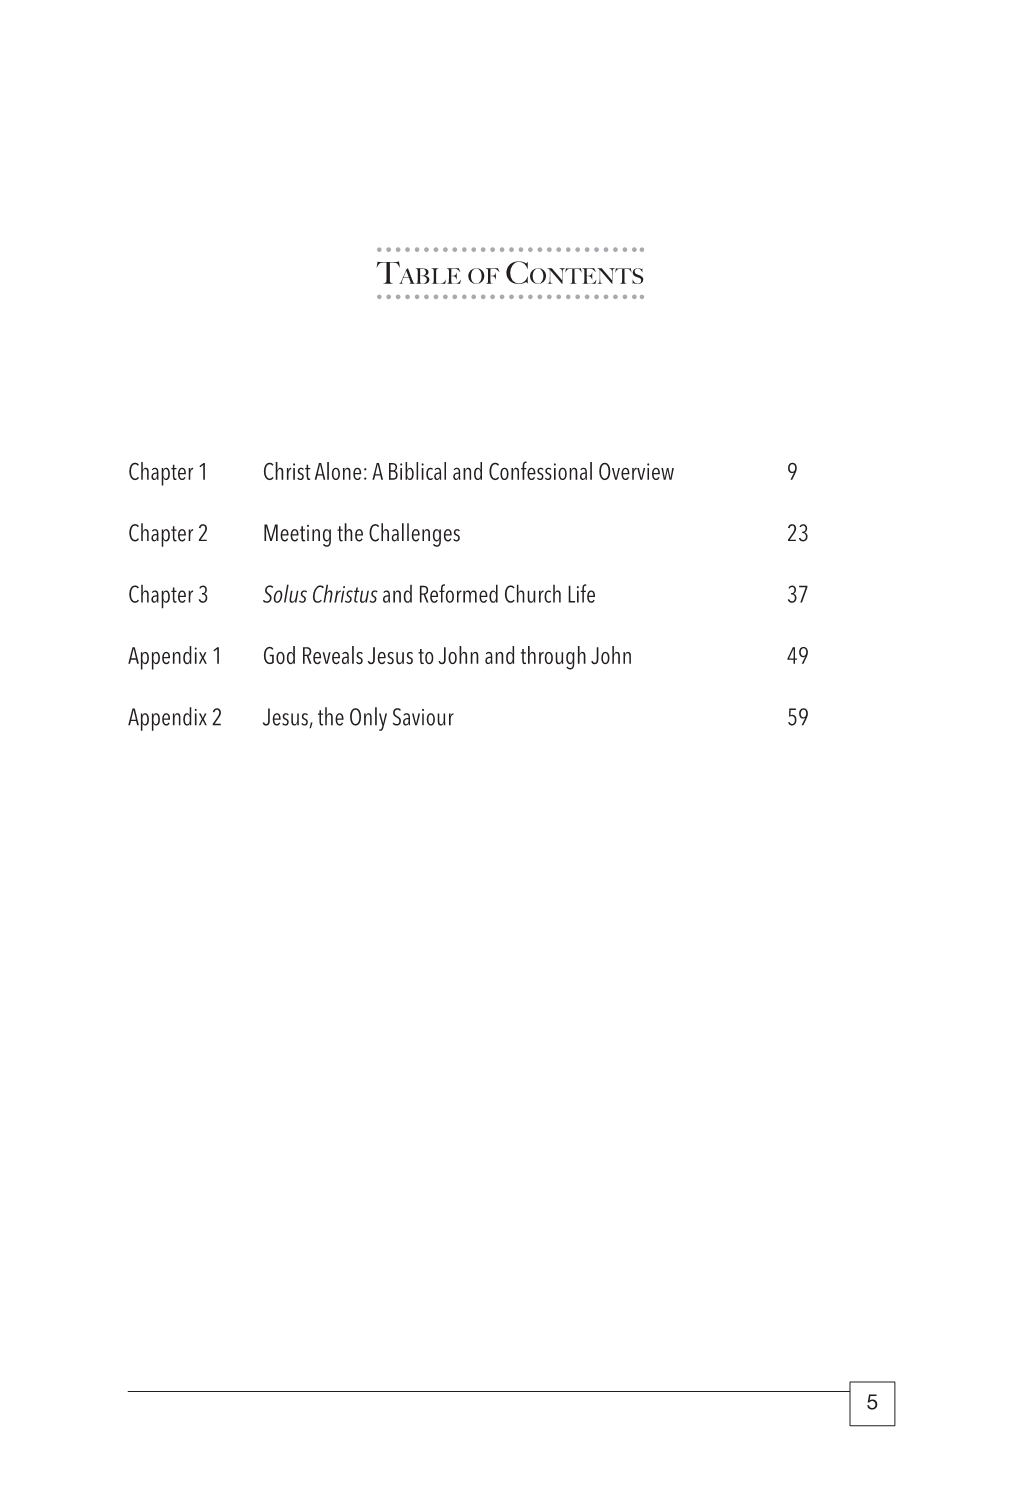 Chapter 1 Christ Alone: a Biblical and Confessional Overview 9